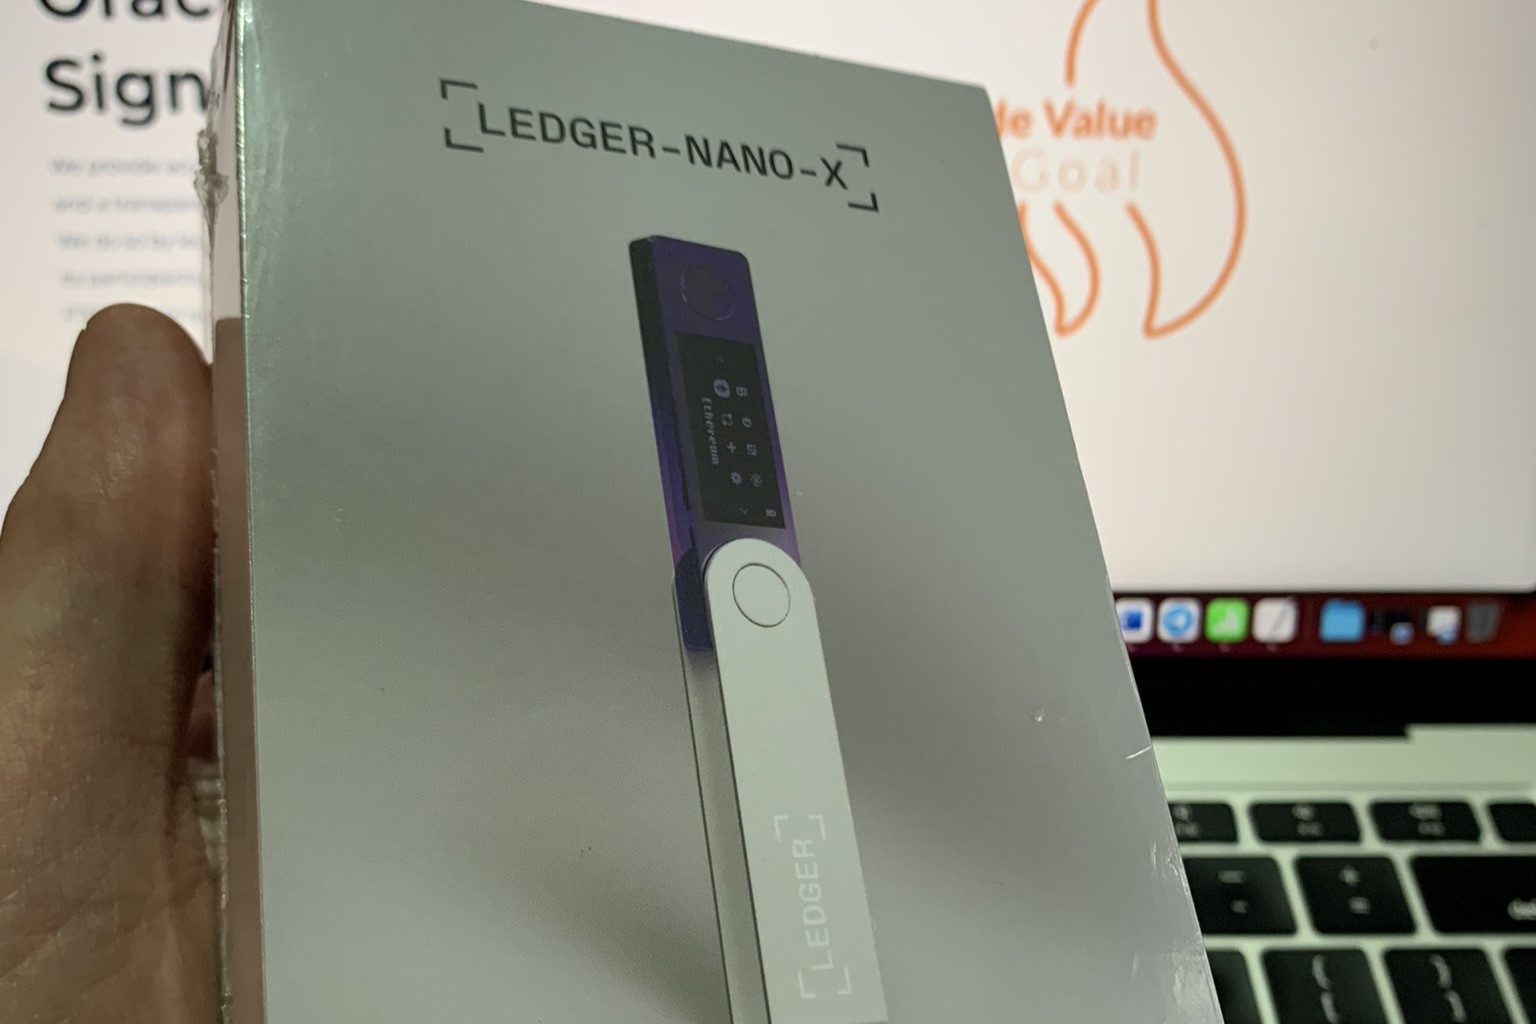 How Long Does It Usually Take To Get The Ledger Nano S If Ordered From Their Website